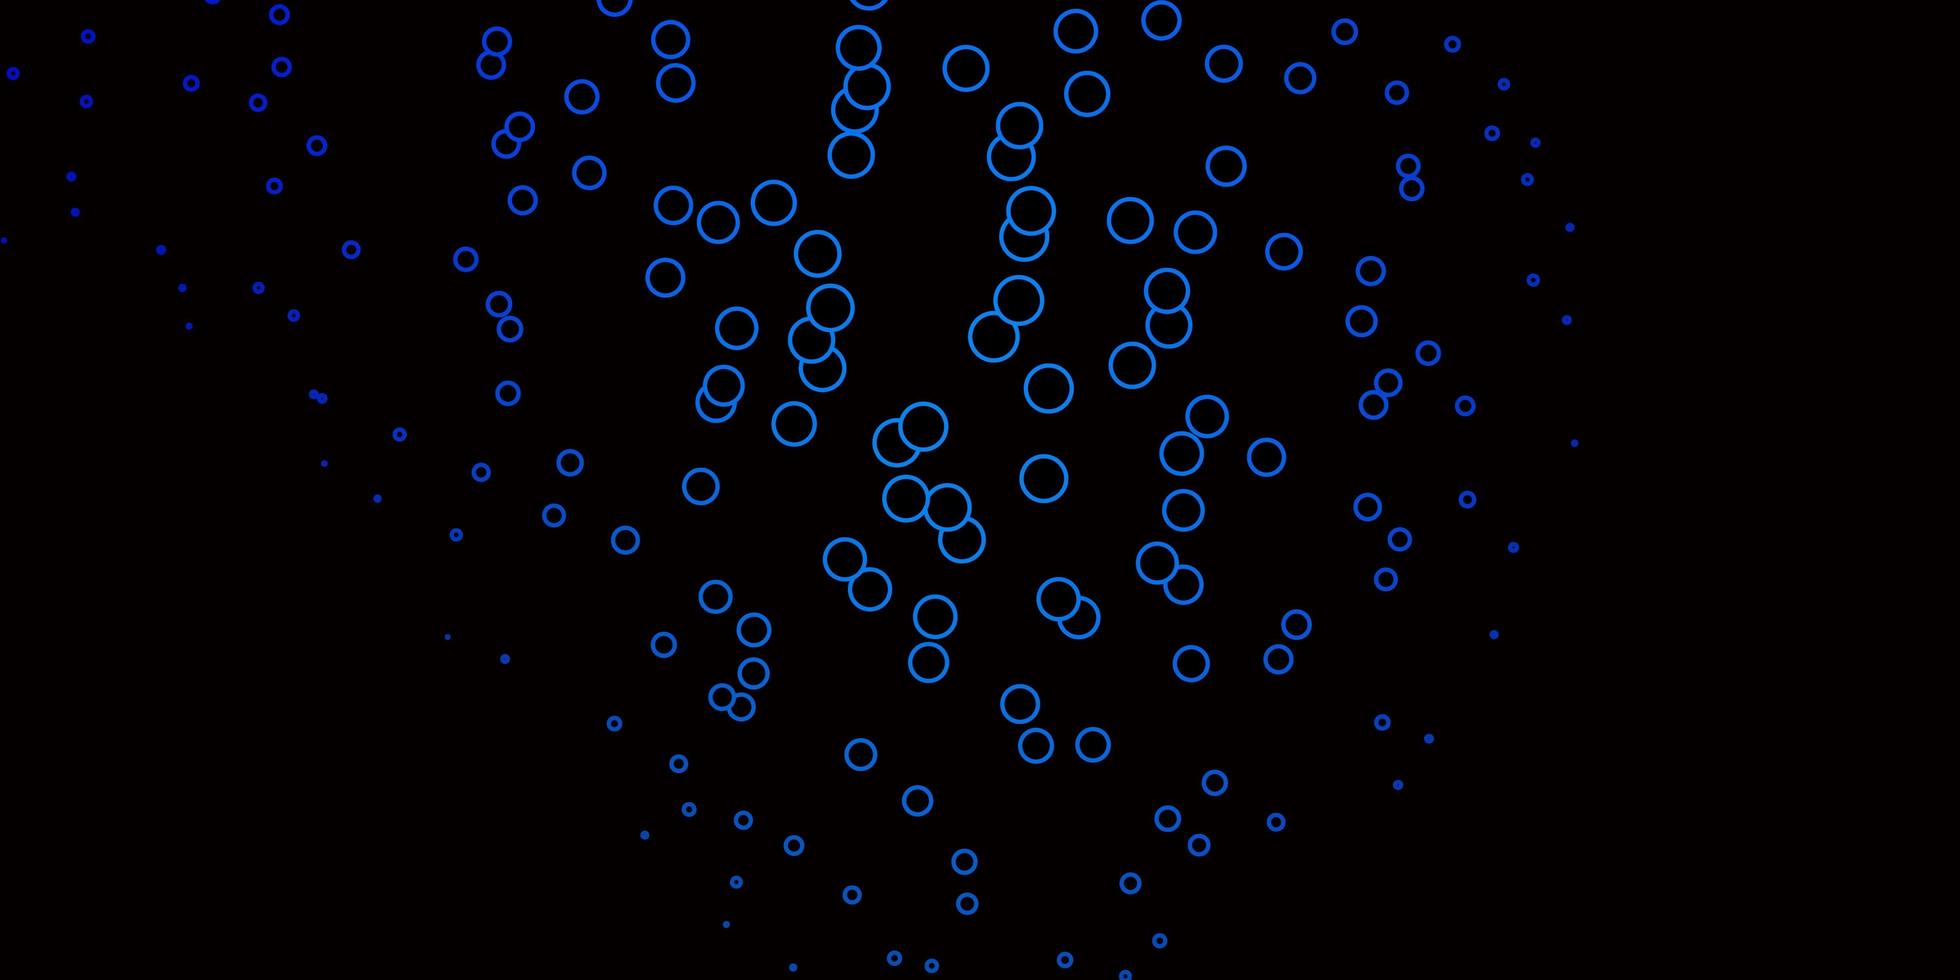 Dark BLUE vector texture with circles